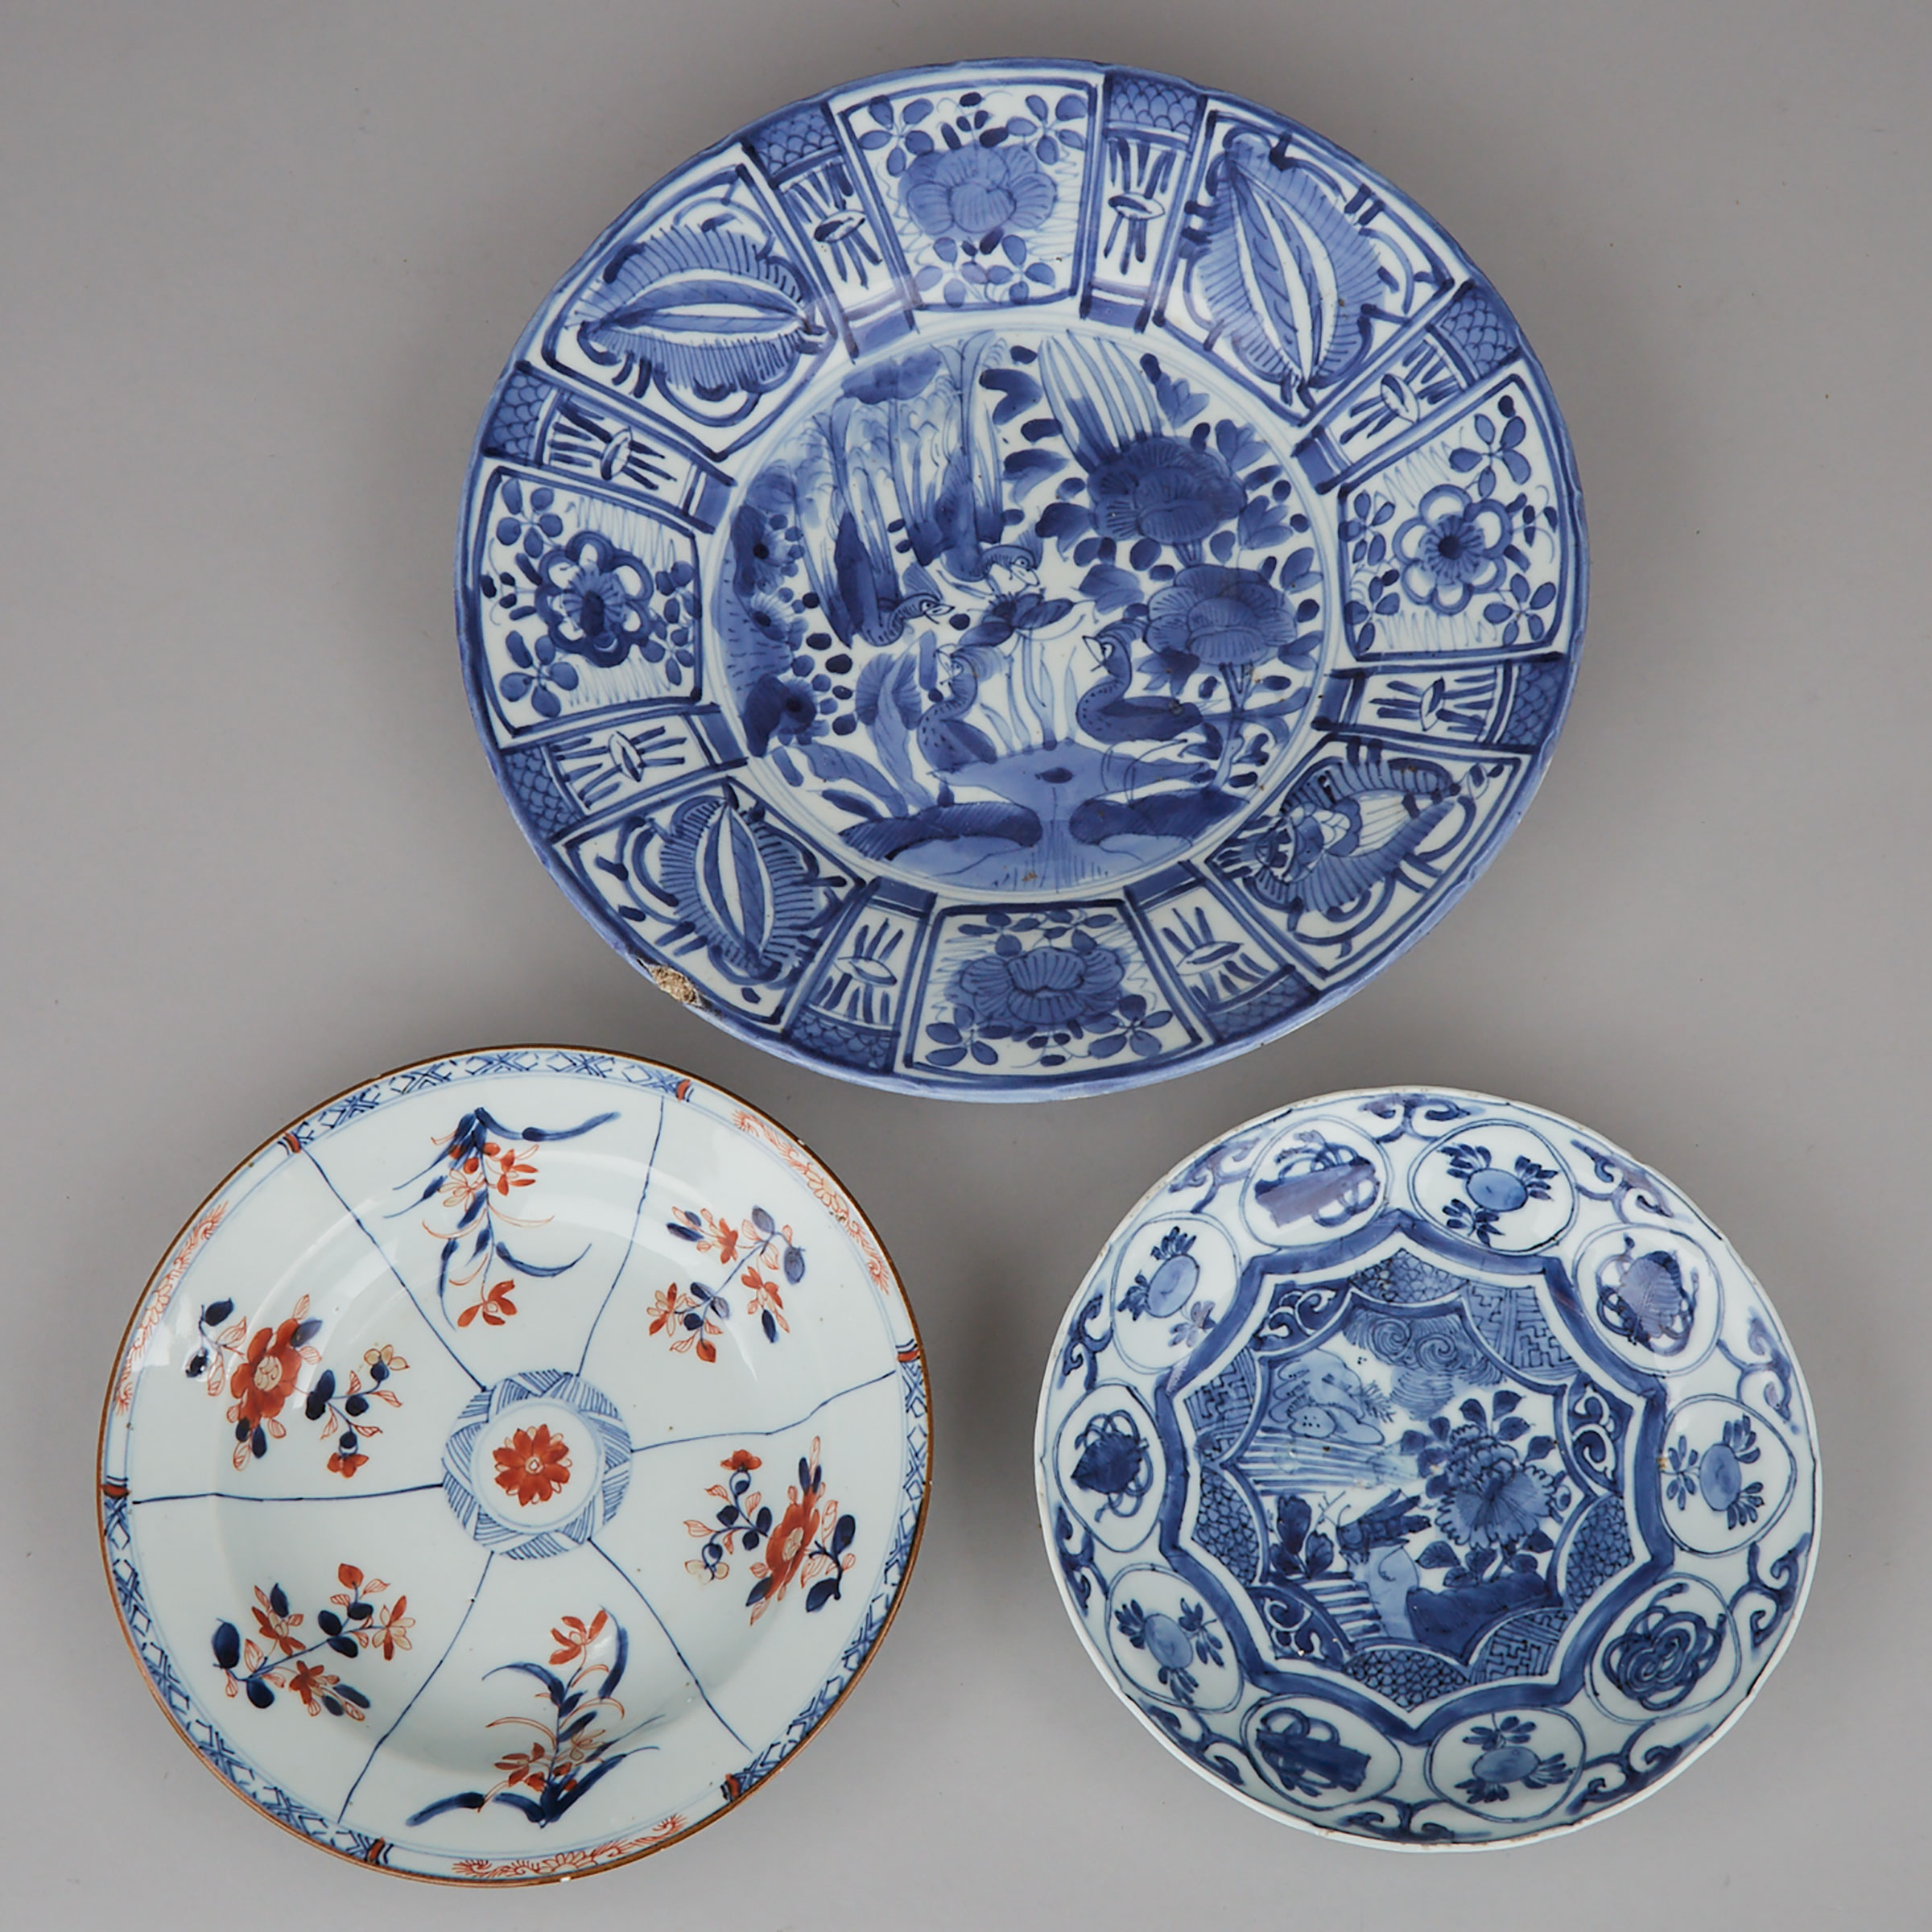 Japanese Export Blue and White Porcelain Charger and Two Chinese Plates, 17th-19th century